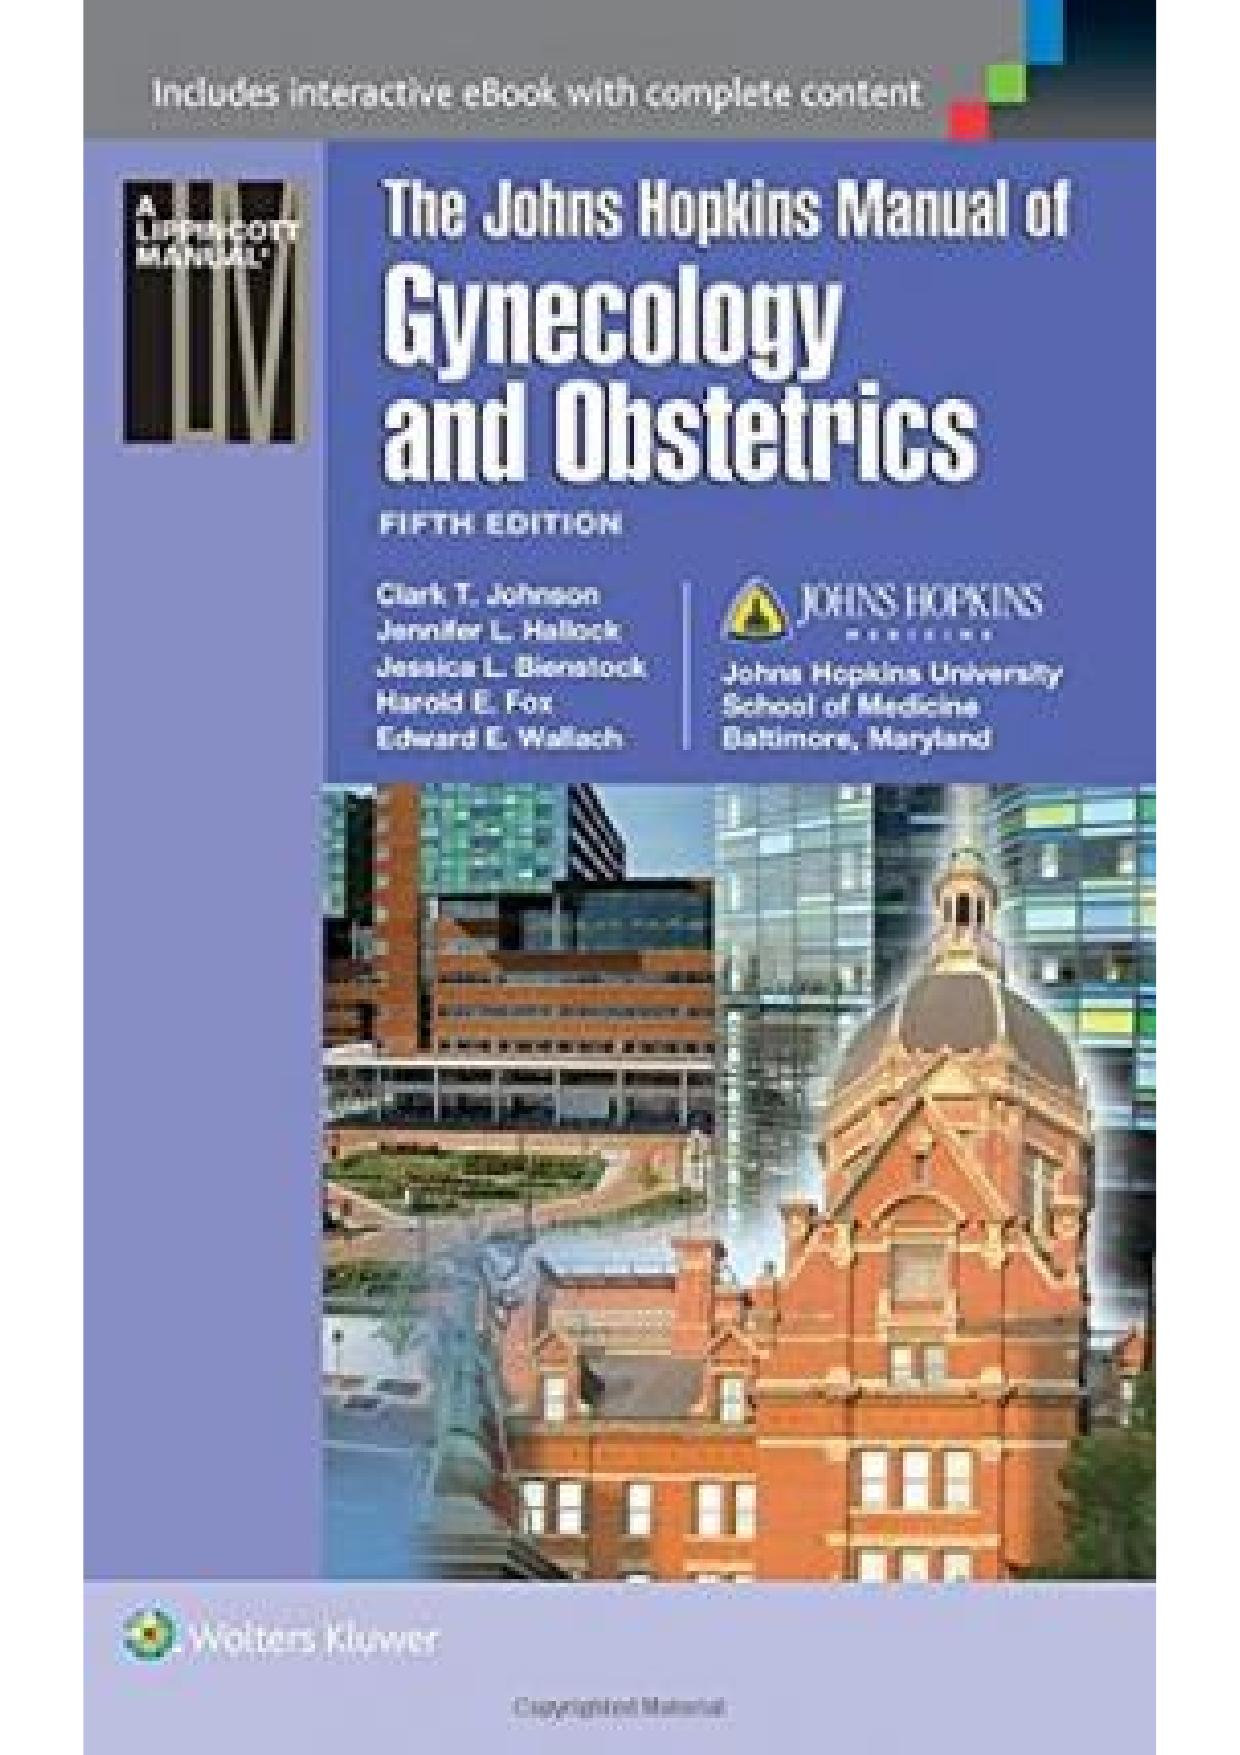 Johns Hopkins Manual of Gynecology and Obstetrics 5th ed